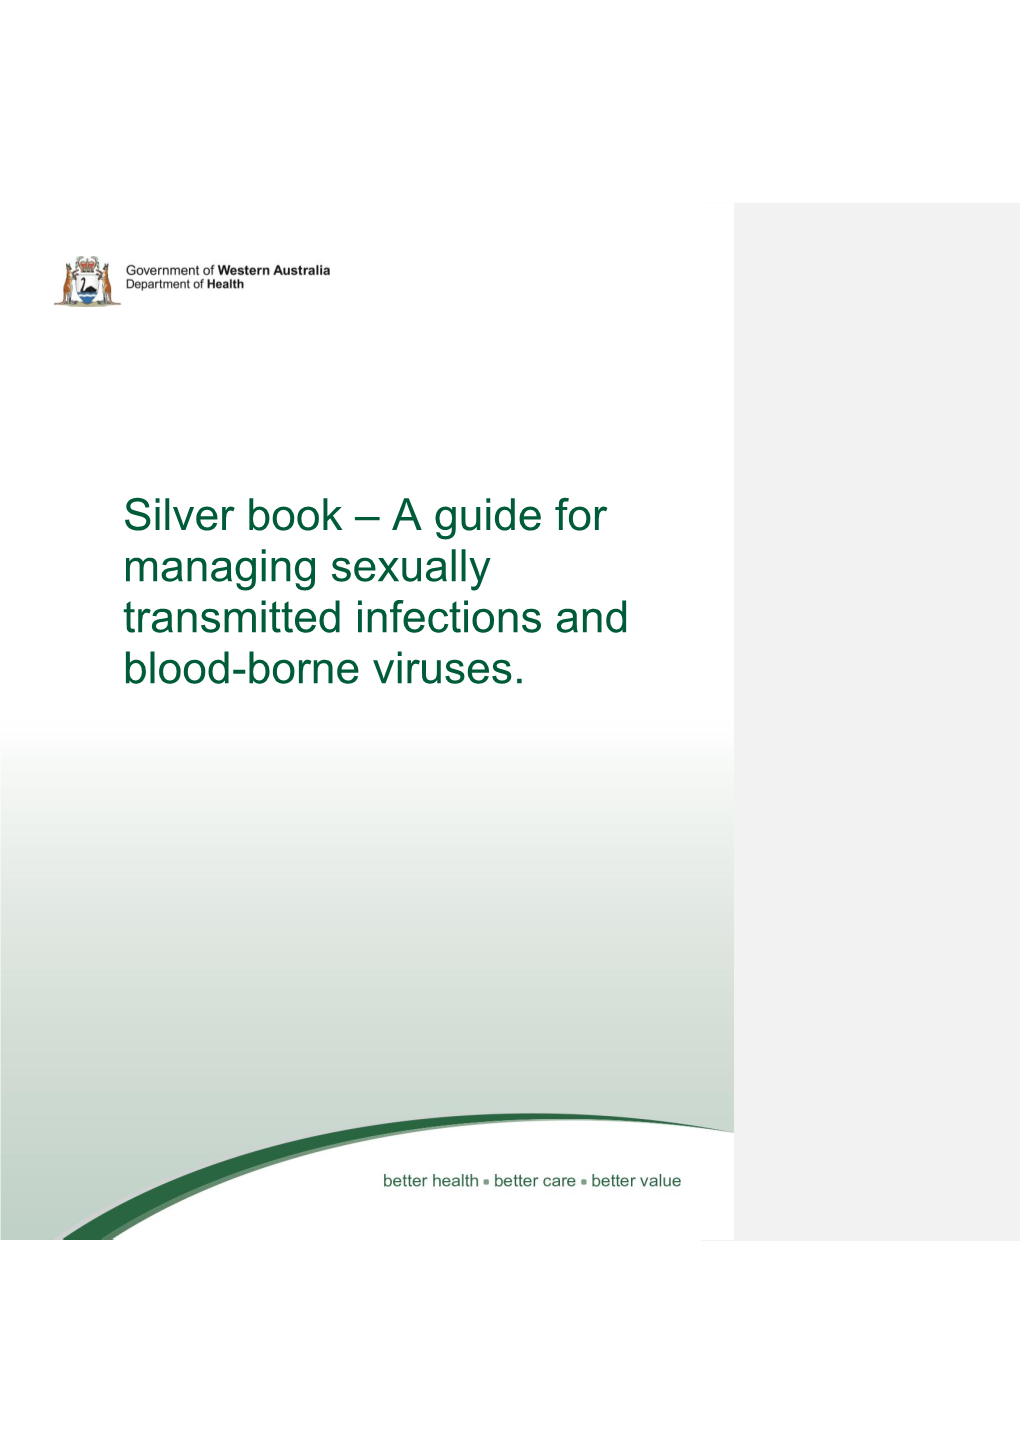 Silver Book – a Guide for Managing Sexually Transmitted Infections and Blood-Borne Viruses